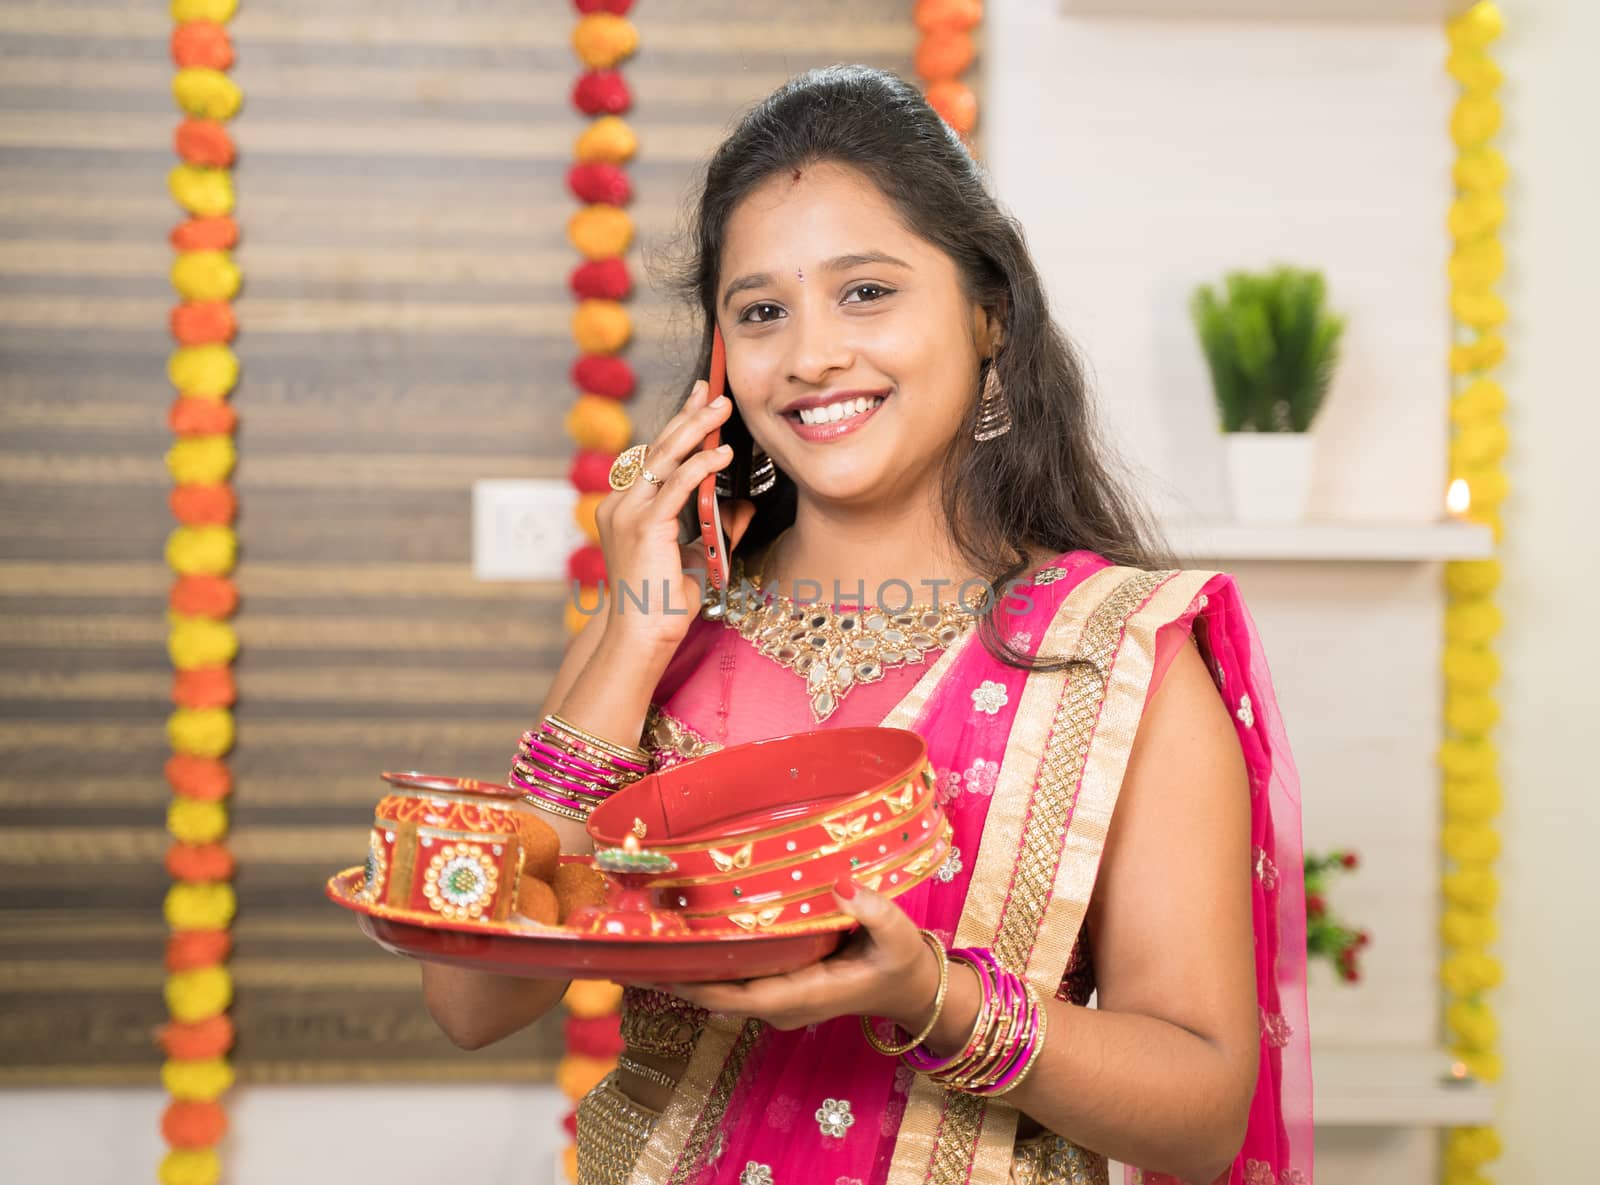 Smiling Indian Woman in traditional dress holding Karva Chauth Thali or plate while busy in talking on mobile. by lakshmiprasad.maski@gmai.com